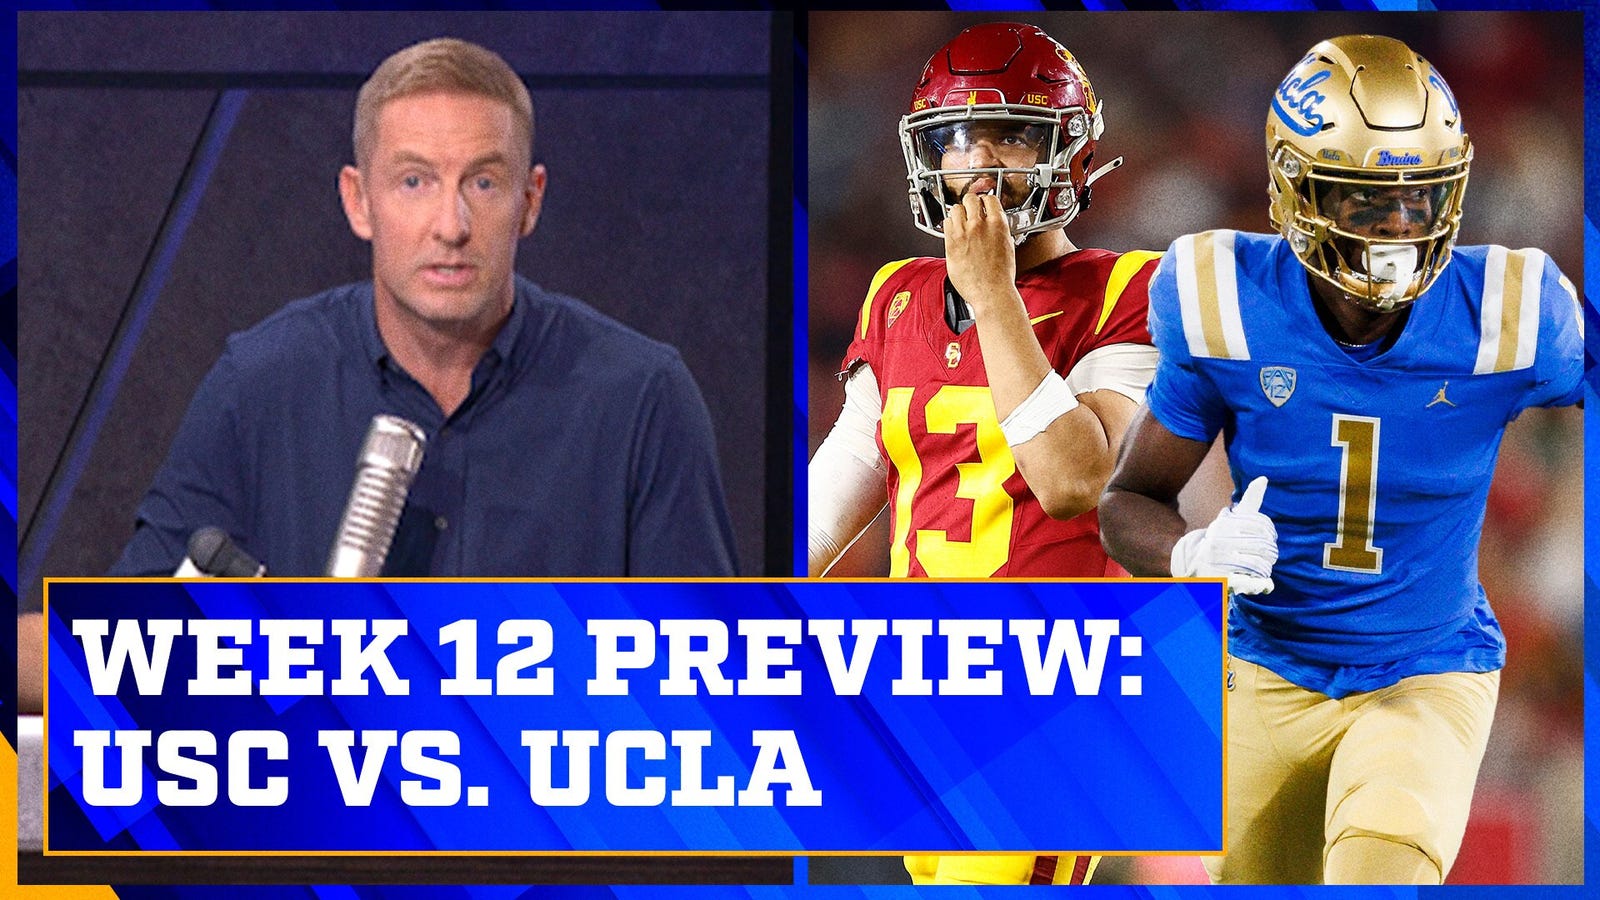 Will UCLA or USC win the cross-town rivalry?